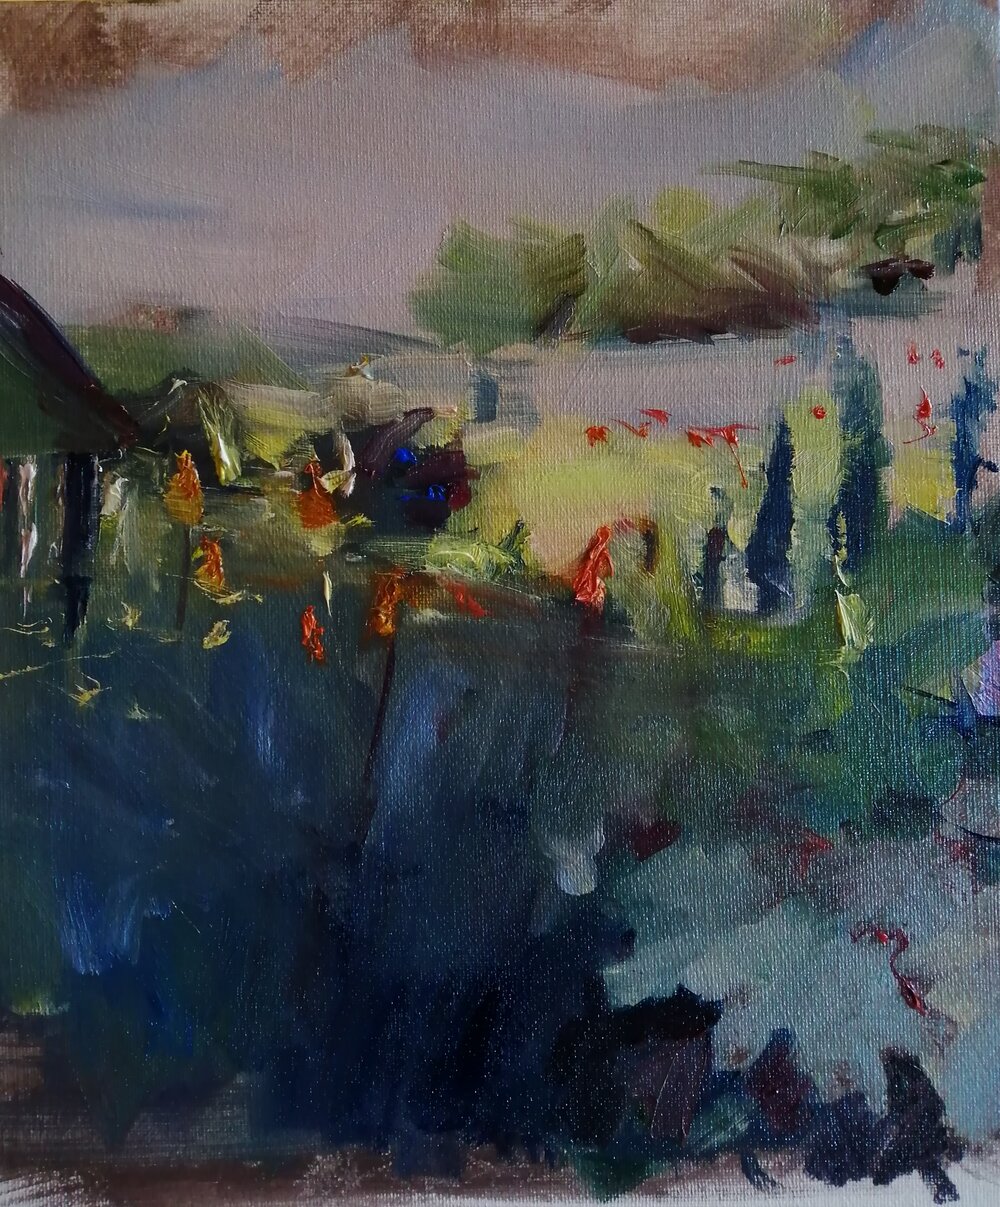  Last summer  Oil on board  26x31 cms  £550  A modern impressionist painting of a garden in august, full of intense colour, light and deep vibrant shadows 